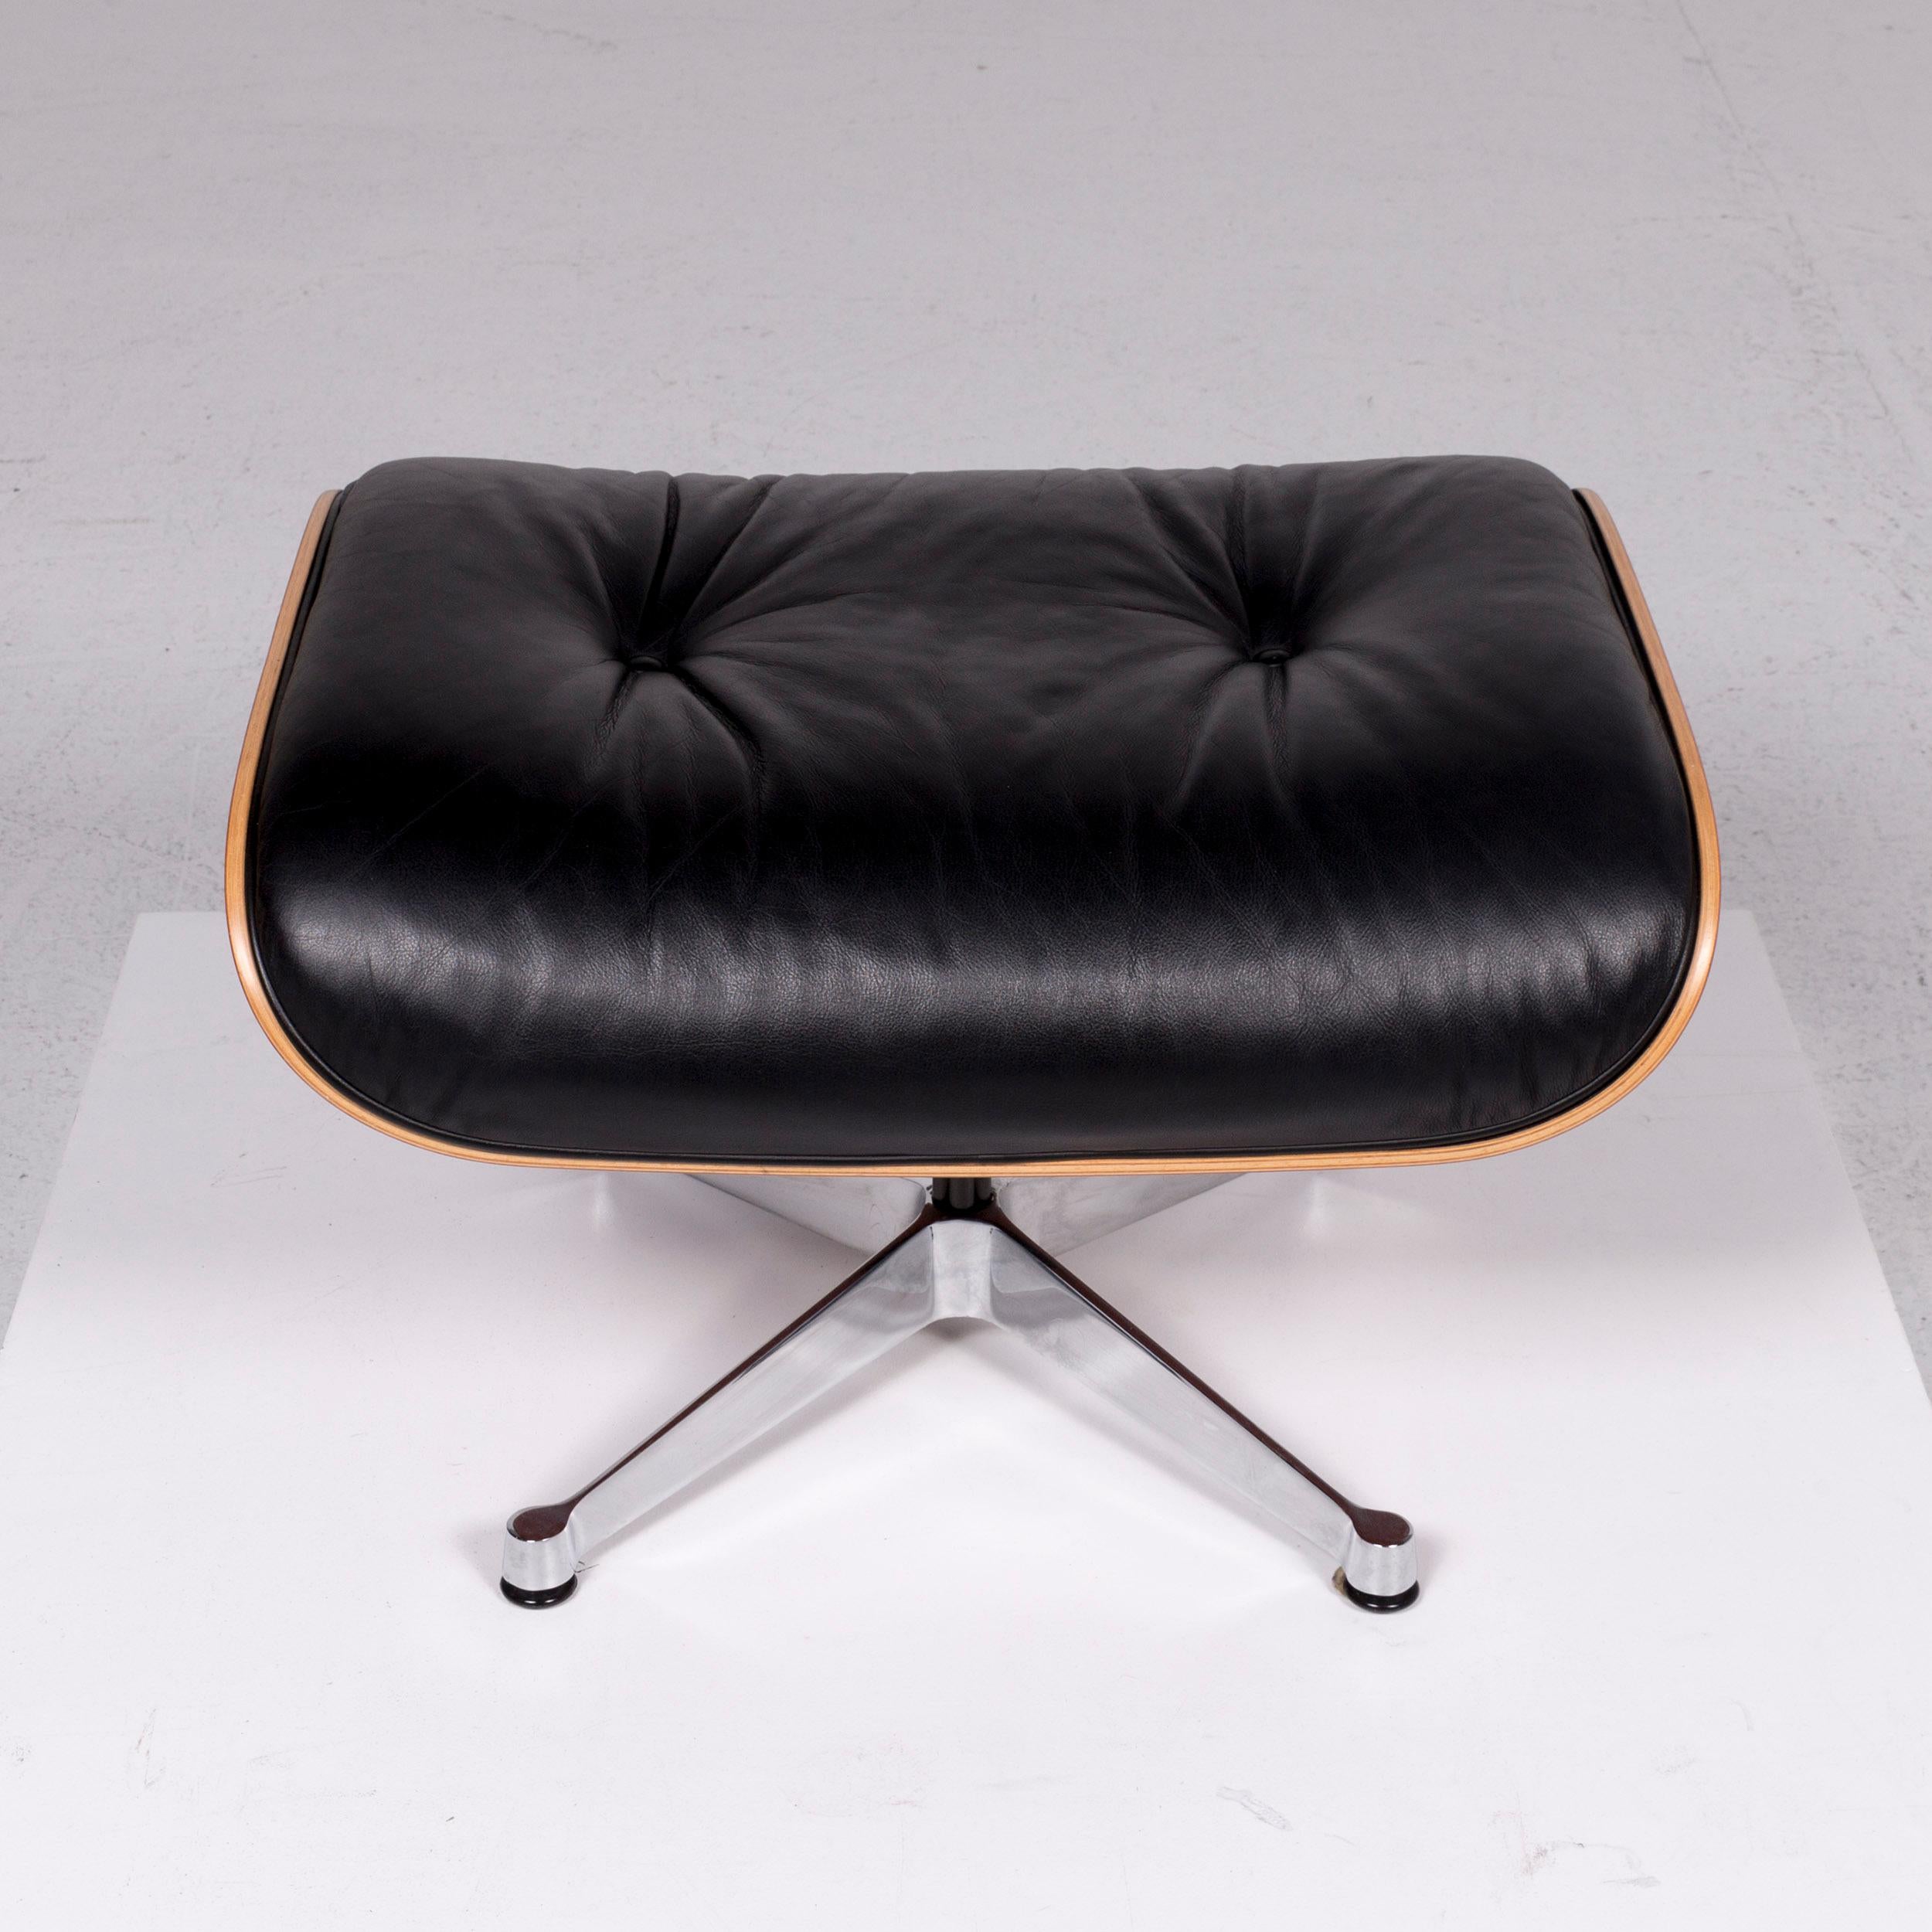 Vitra Eames Lounge Chair Leather Armchair Black Incl. Stool Cherrywood Club 10